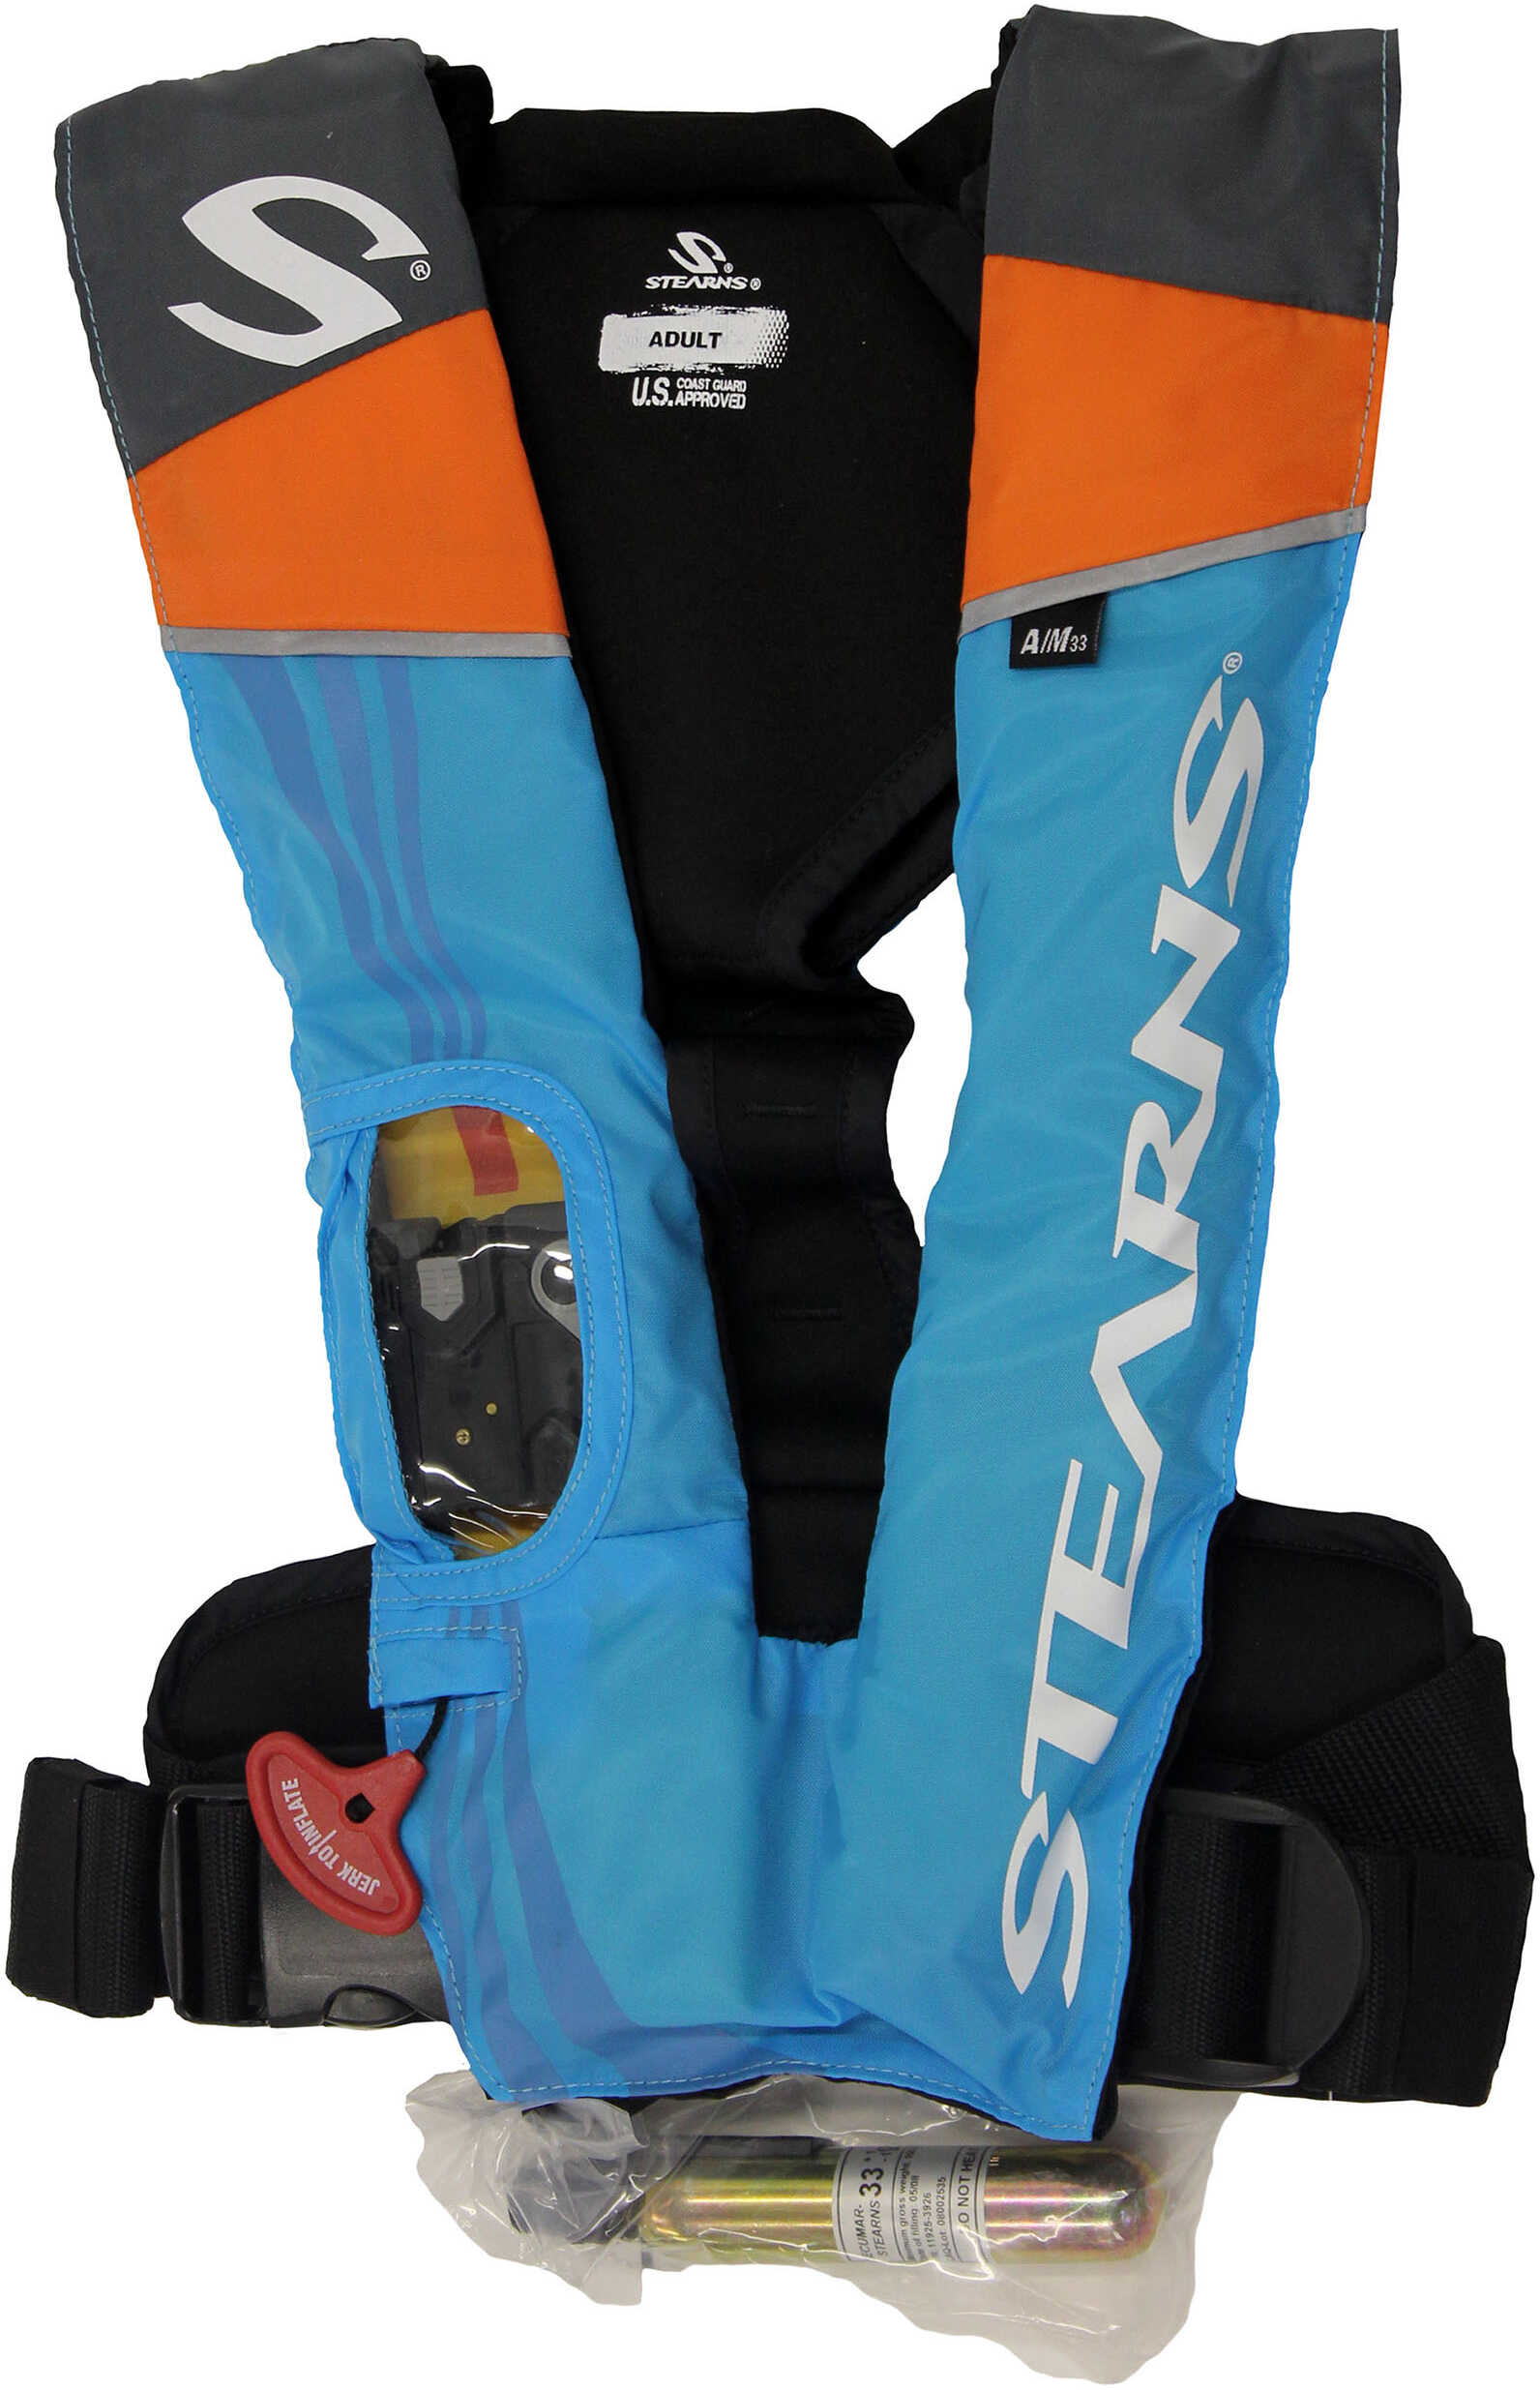 Stearns PFD 1493 Auto/Manual, Inflatable, Blue Md: 2000013886